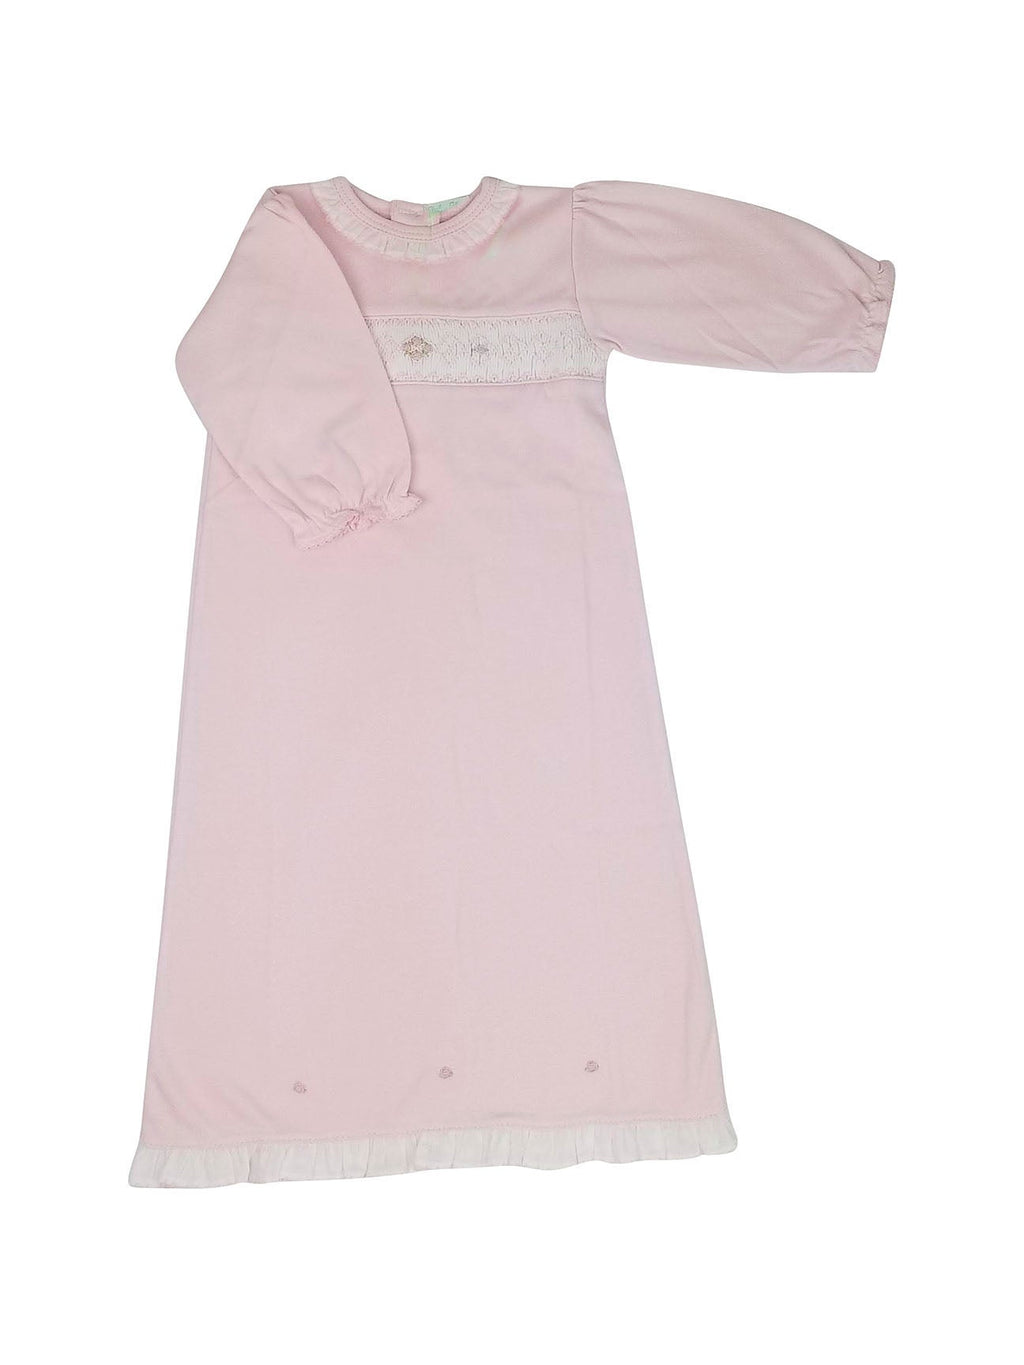 Baby Girl's Pink Smocked Flowers Daygown - Little Threads Inc. Children's Clothing